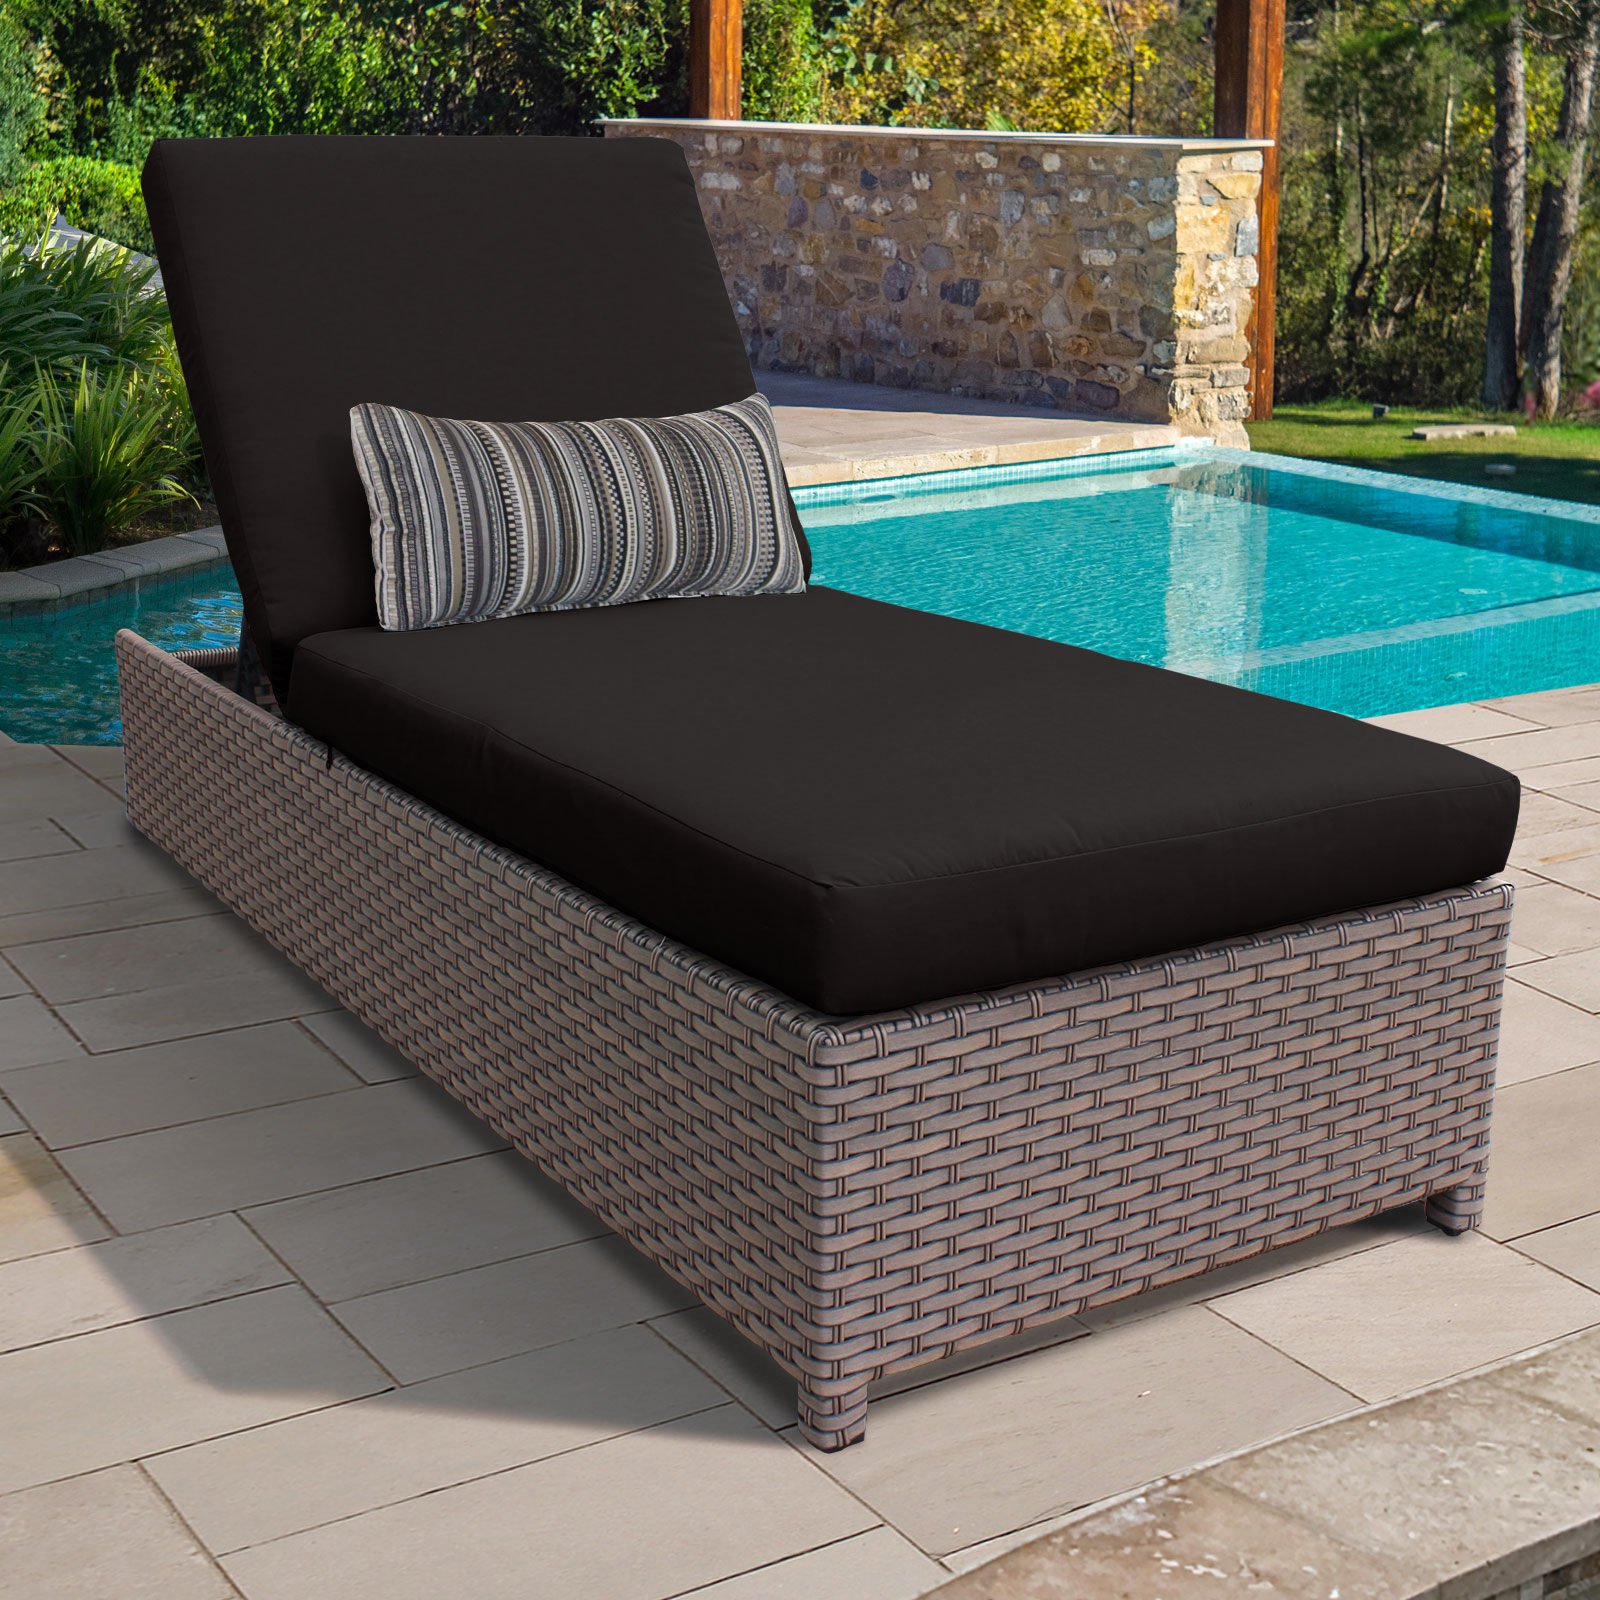 TK Classics Monterey Wheeled Wicker Outdoor Chaise Lounge Chair - image 5 of 11